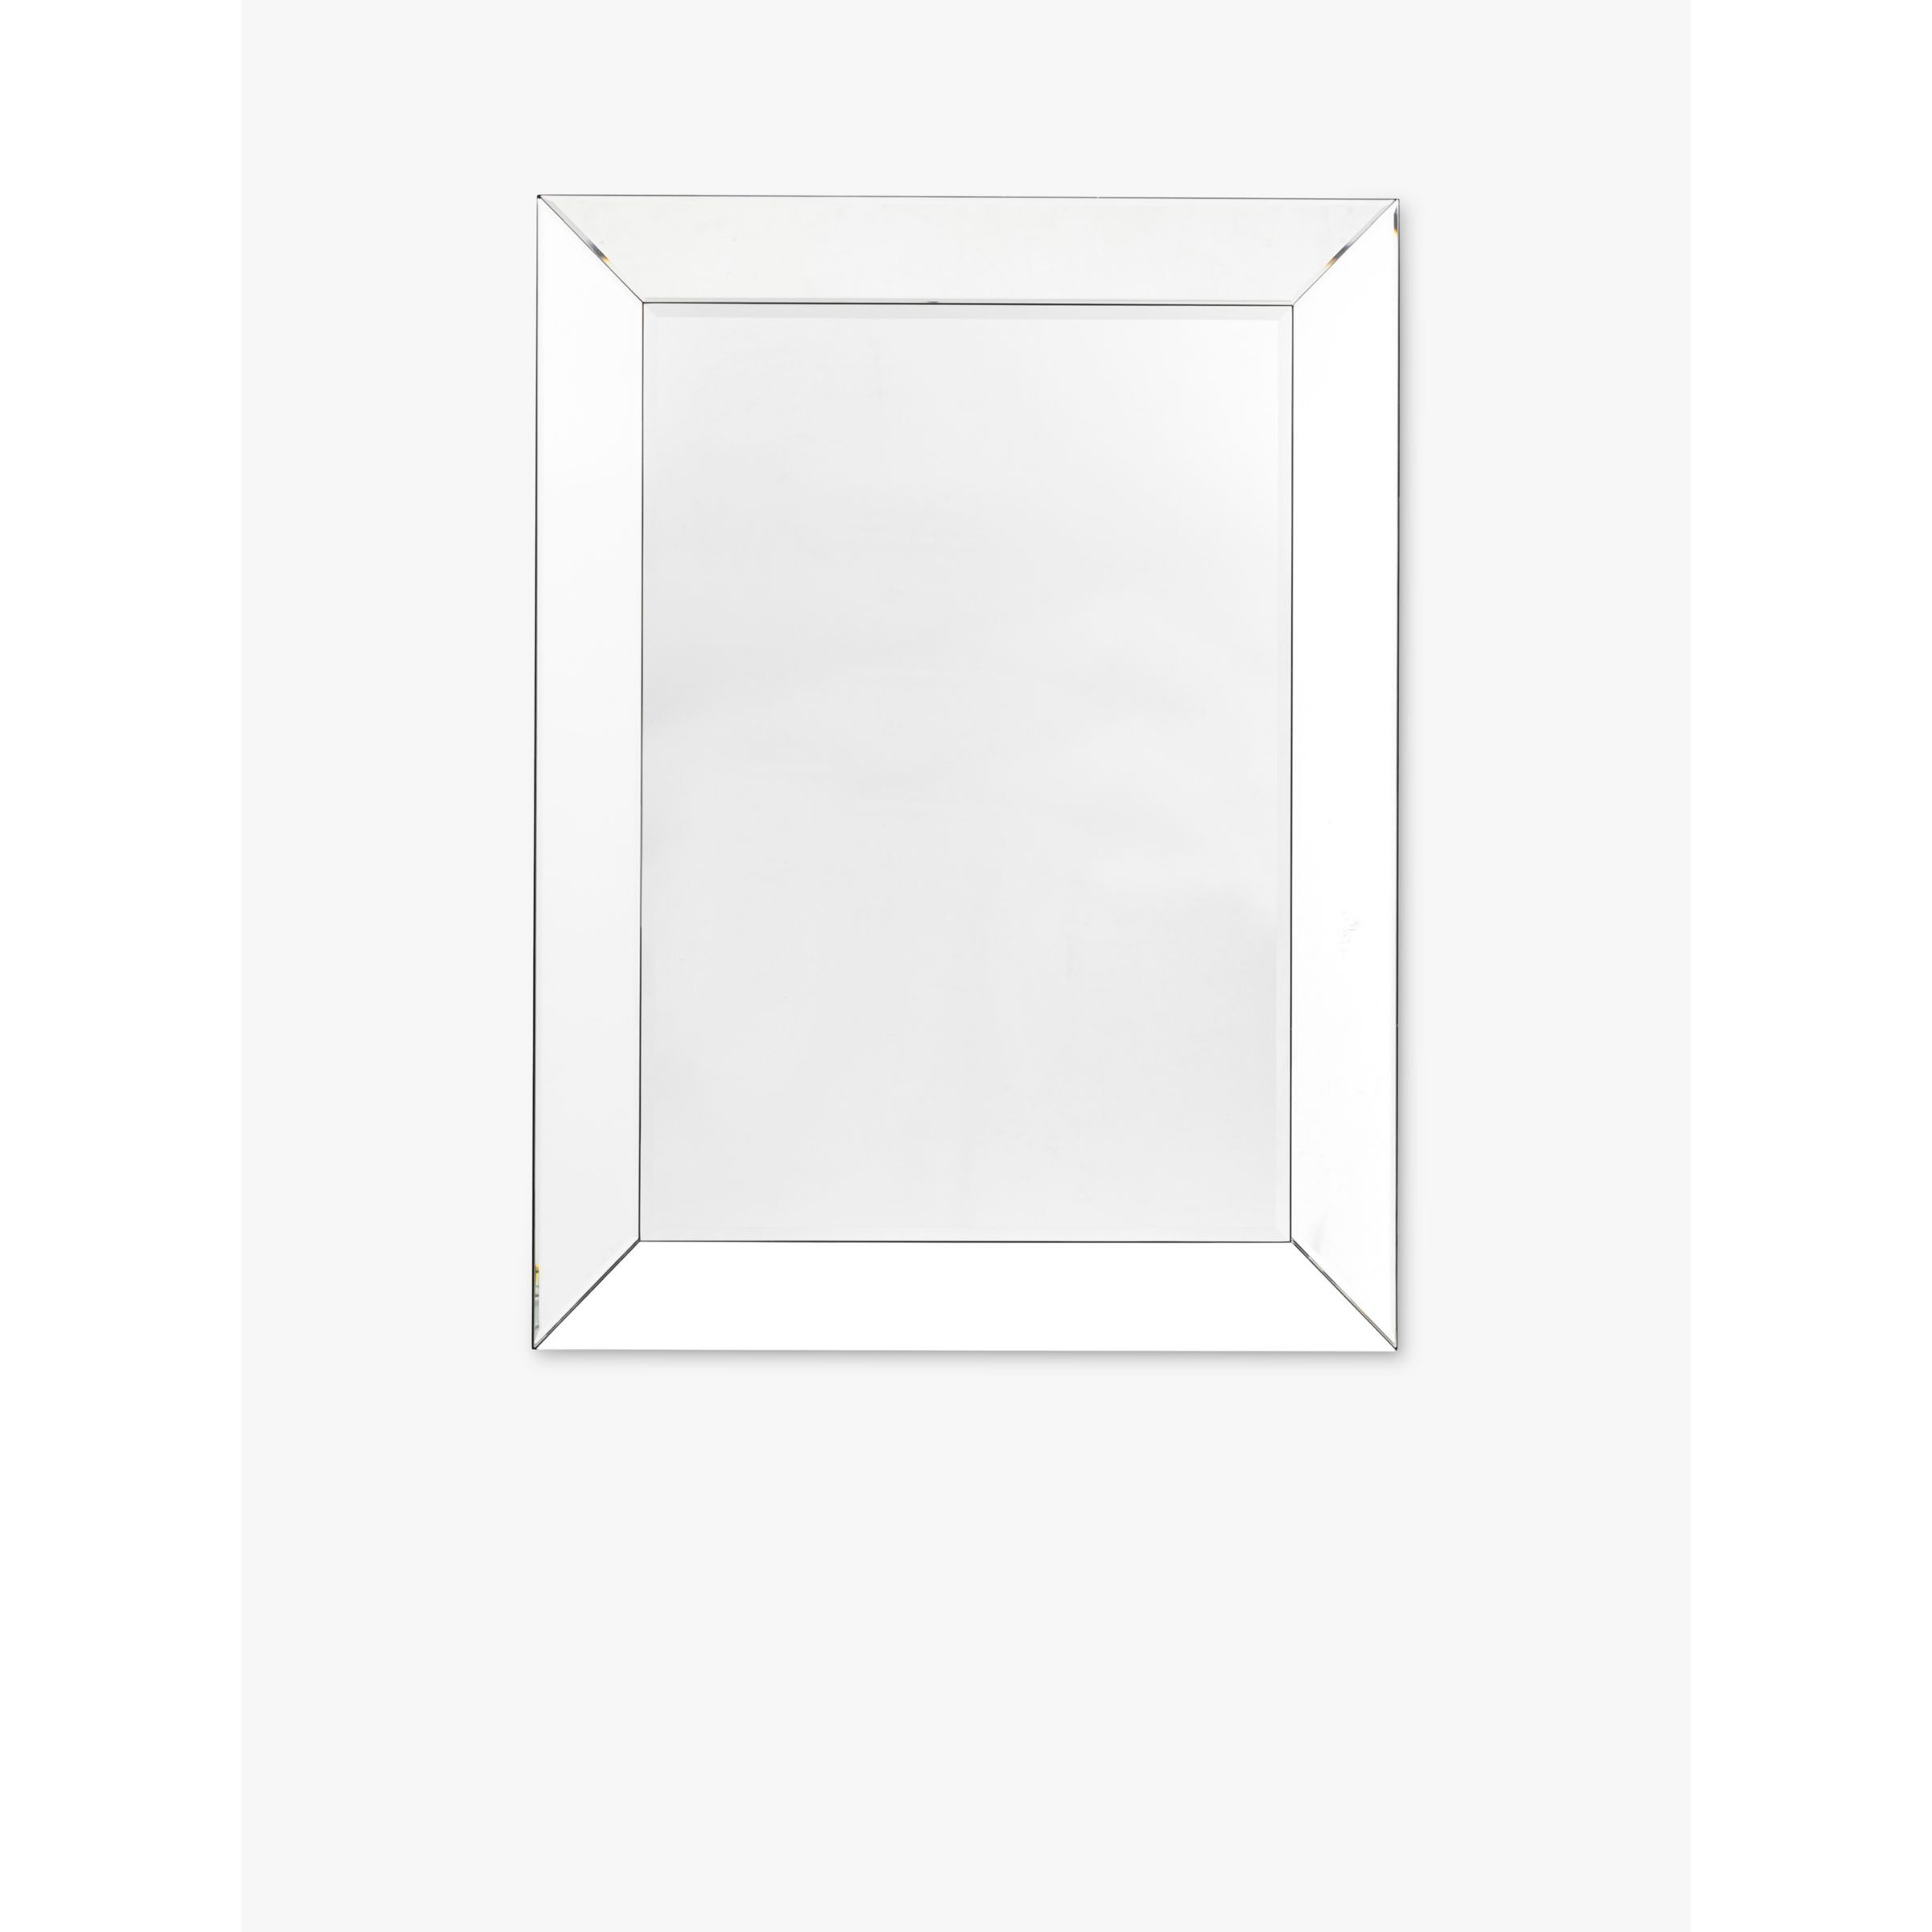 Gallery Direct Salinas Rectangular Bevelled Glass Wall Mirror, 120 x 90cm, Clear/Black - image 1